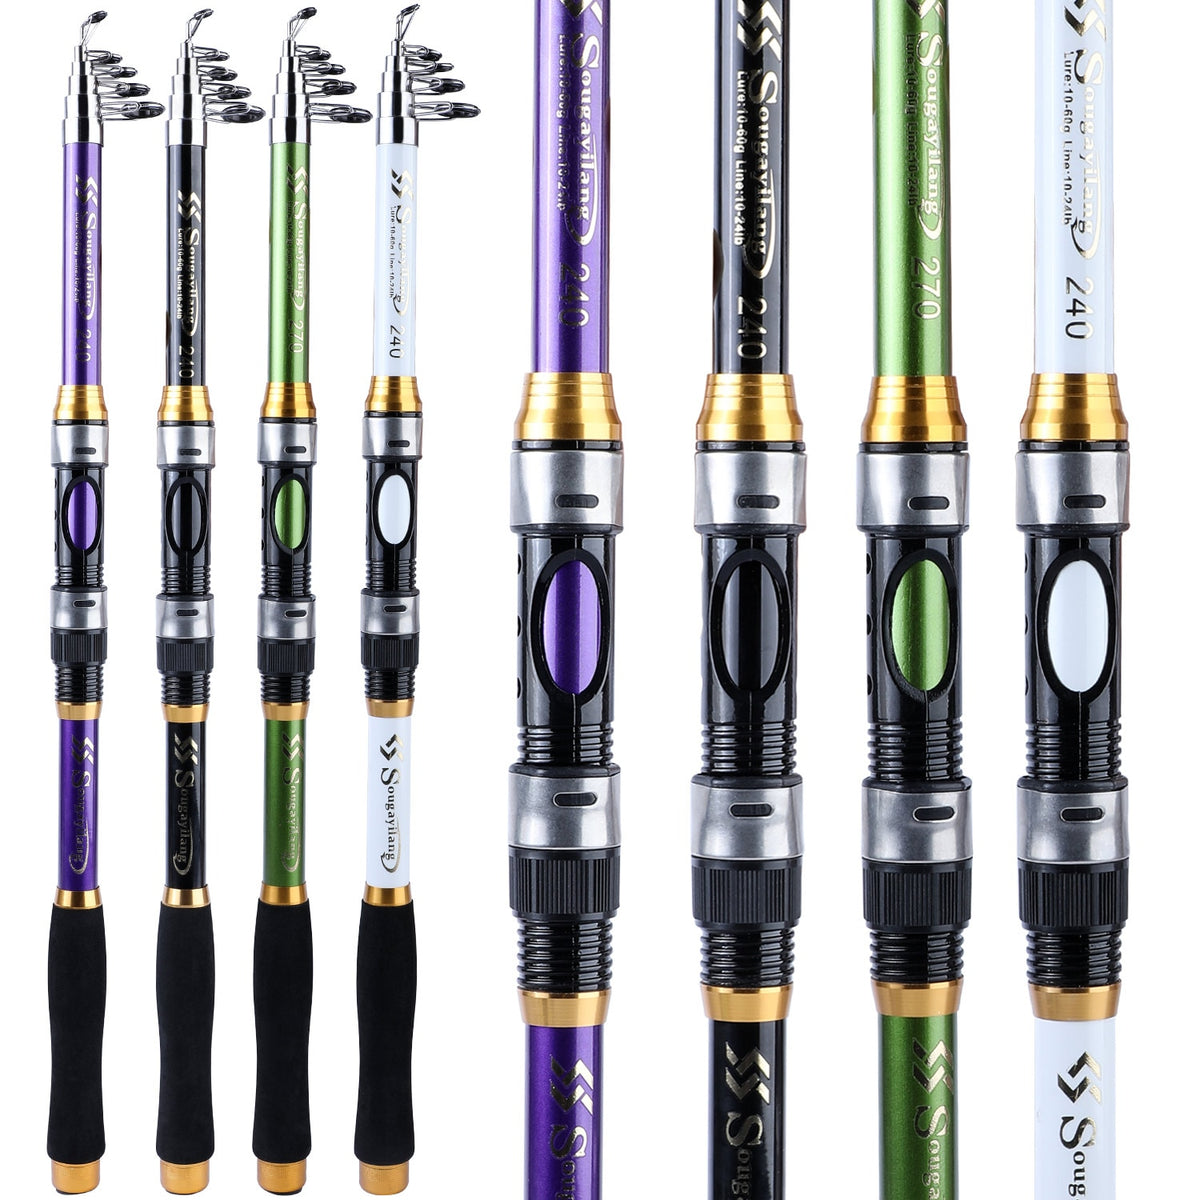 Sougayilang Fishing Rod and Reel Combo 1.8m-3.3m Telescopic Rod and 11+1 BB  5.2:1/5.1:1 Gear Ratio Spinning Fishing Reel Set